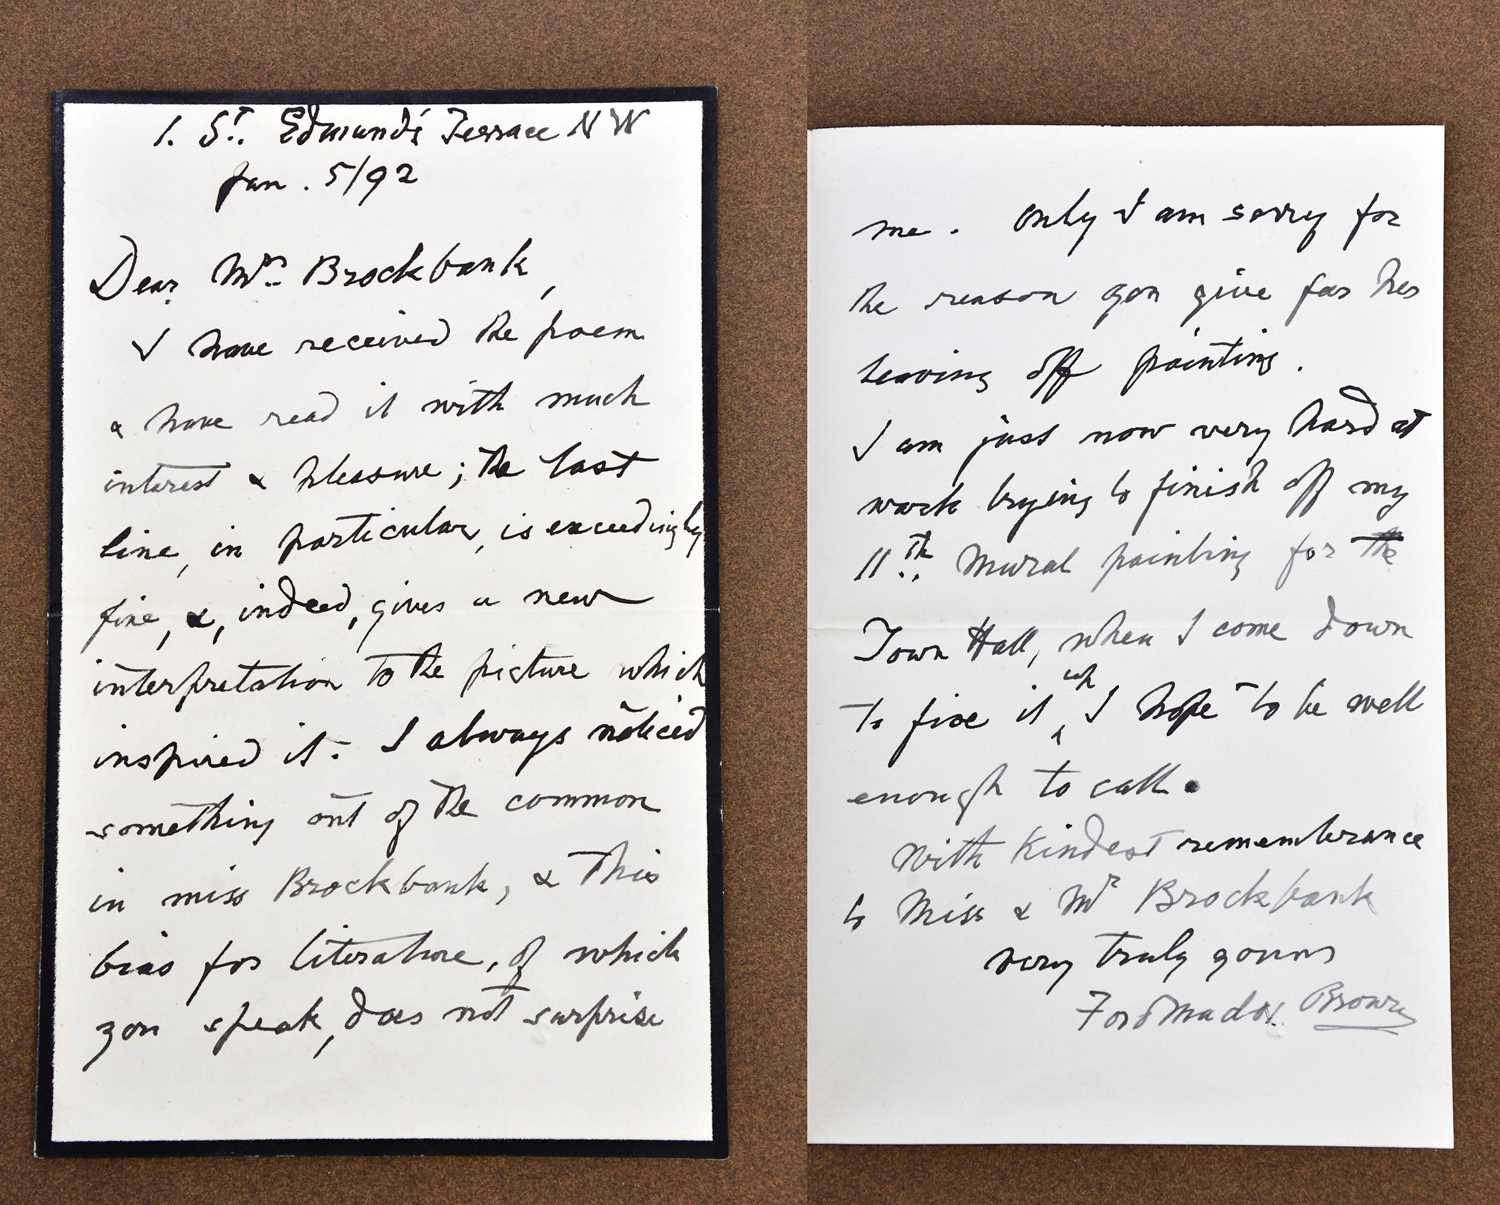 FORD MADOX BROWN, PRE-RAPHAELITE PAINTER (1821-1893); a handwritten and signed letter which - Image 9 of 9